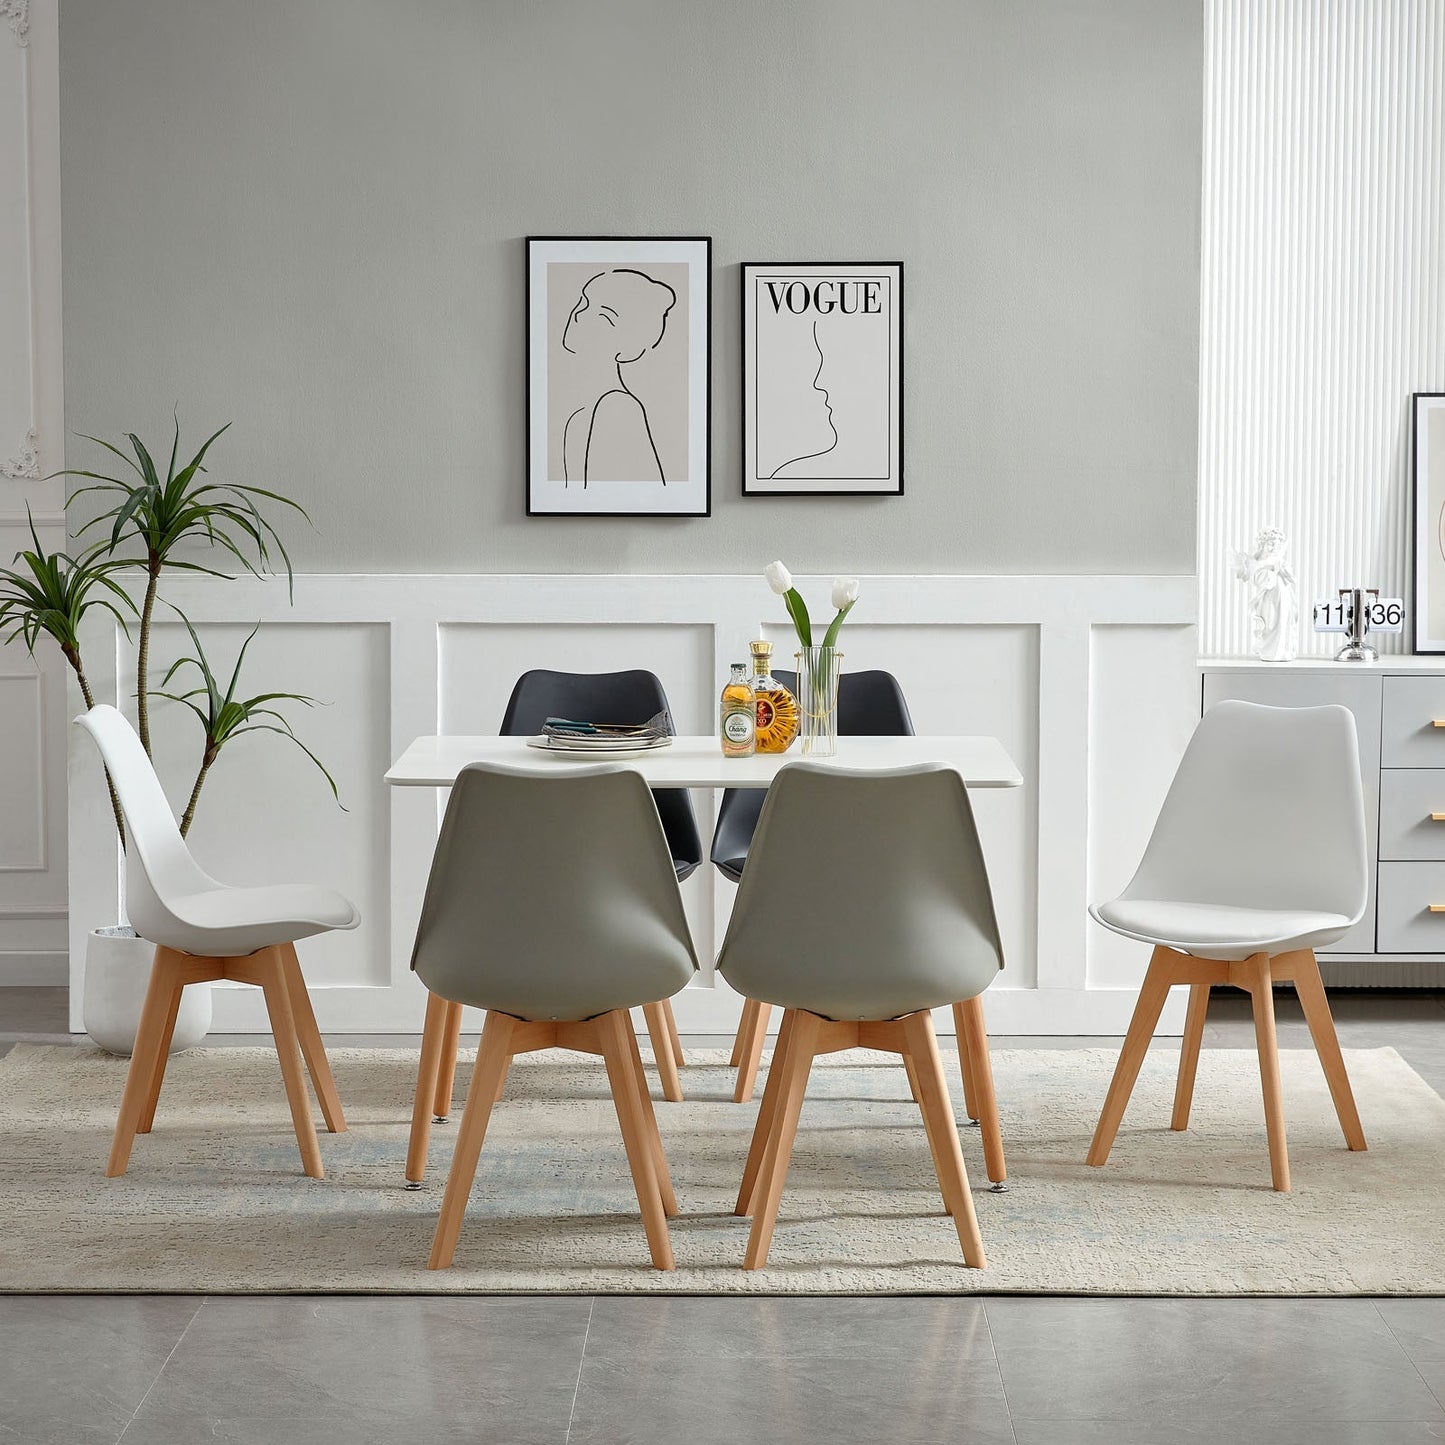 TULIP PP Dining Chairs with Beech Legs Scandinavian Design Kitchen Chairs - Black and White and Grey